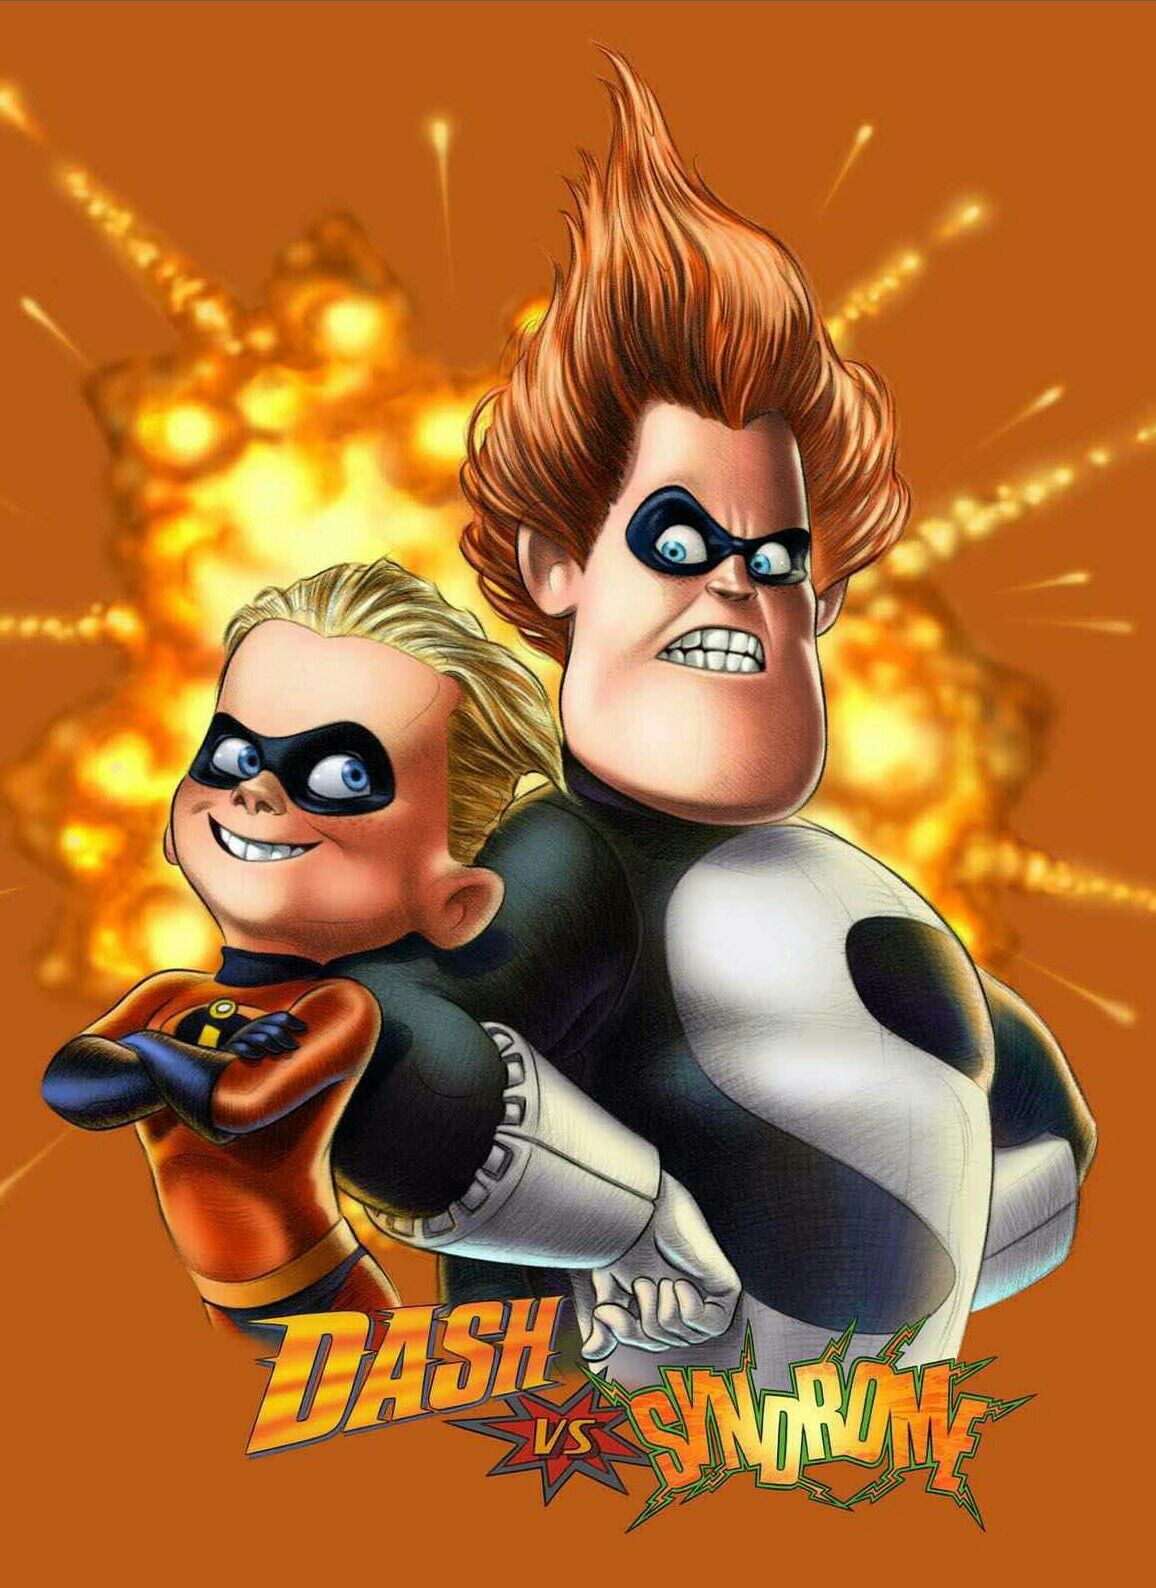 THE INCREDIBLES DASH V SYNDROME. Syndrome the incredibles, The incredibles, Animation